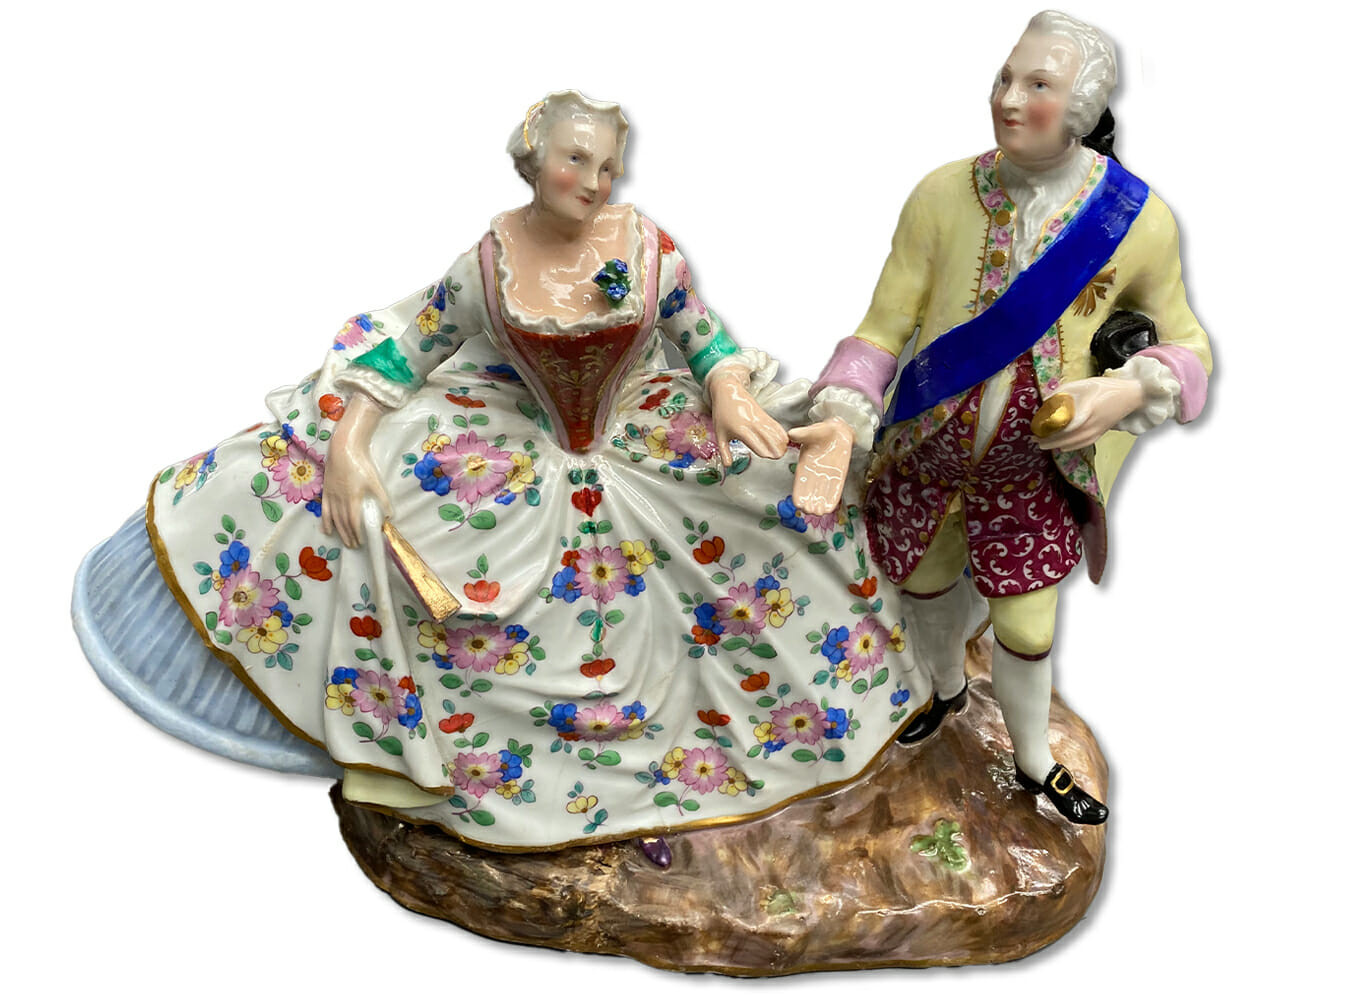 Meissen example after fine bone china repair